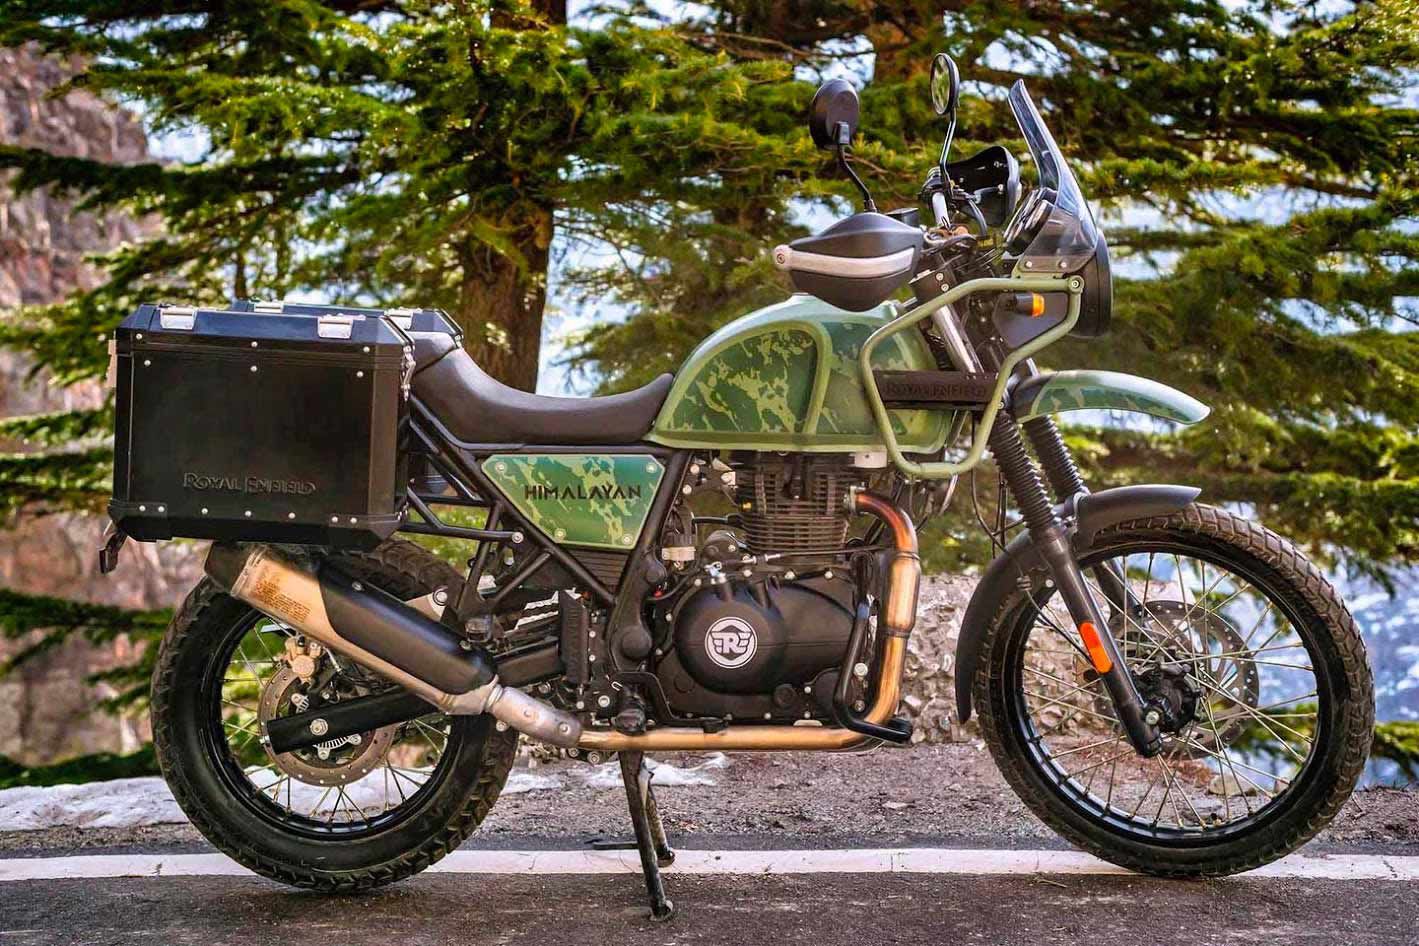 Did you see this coming? This 2022 Royal Enfield Himalayan in camouflage.